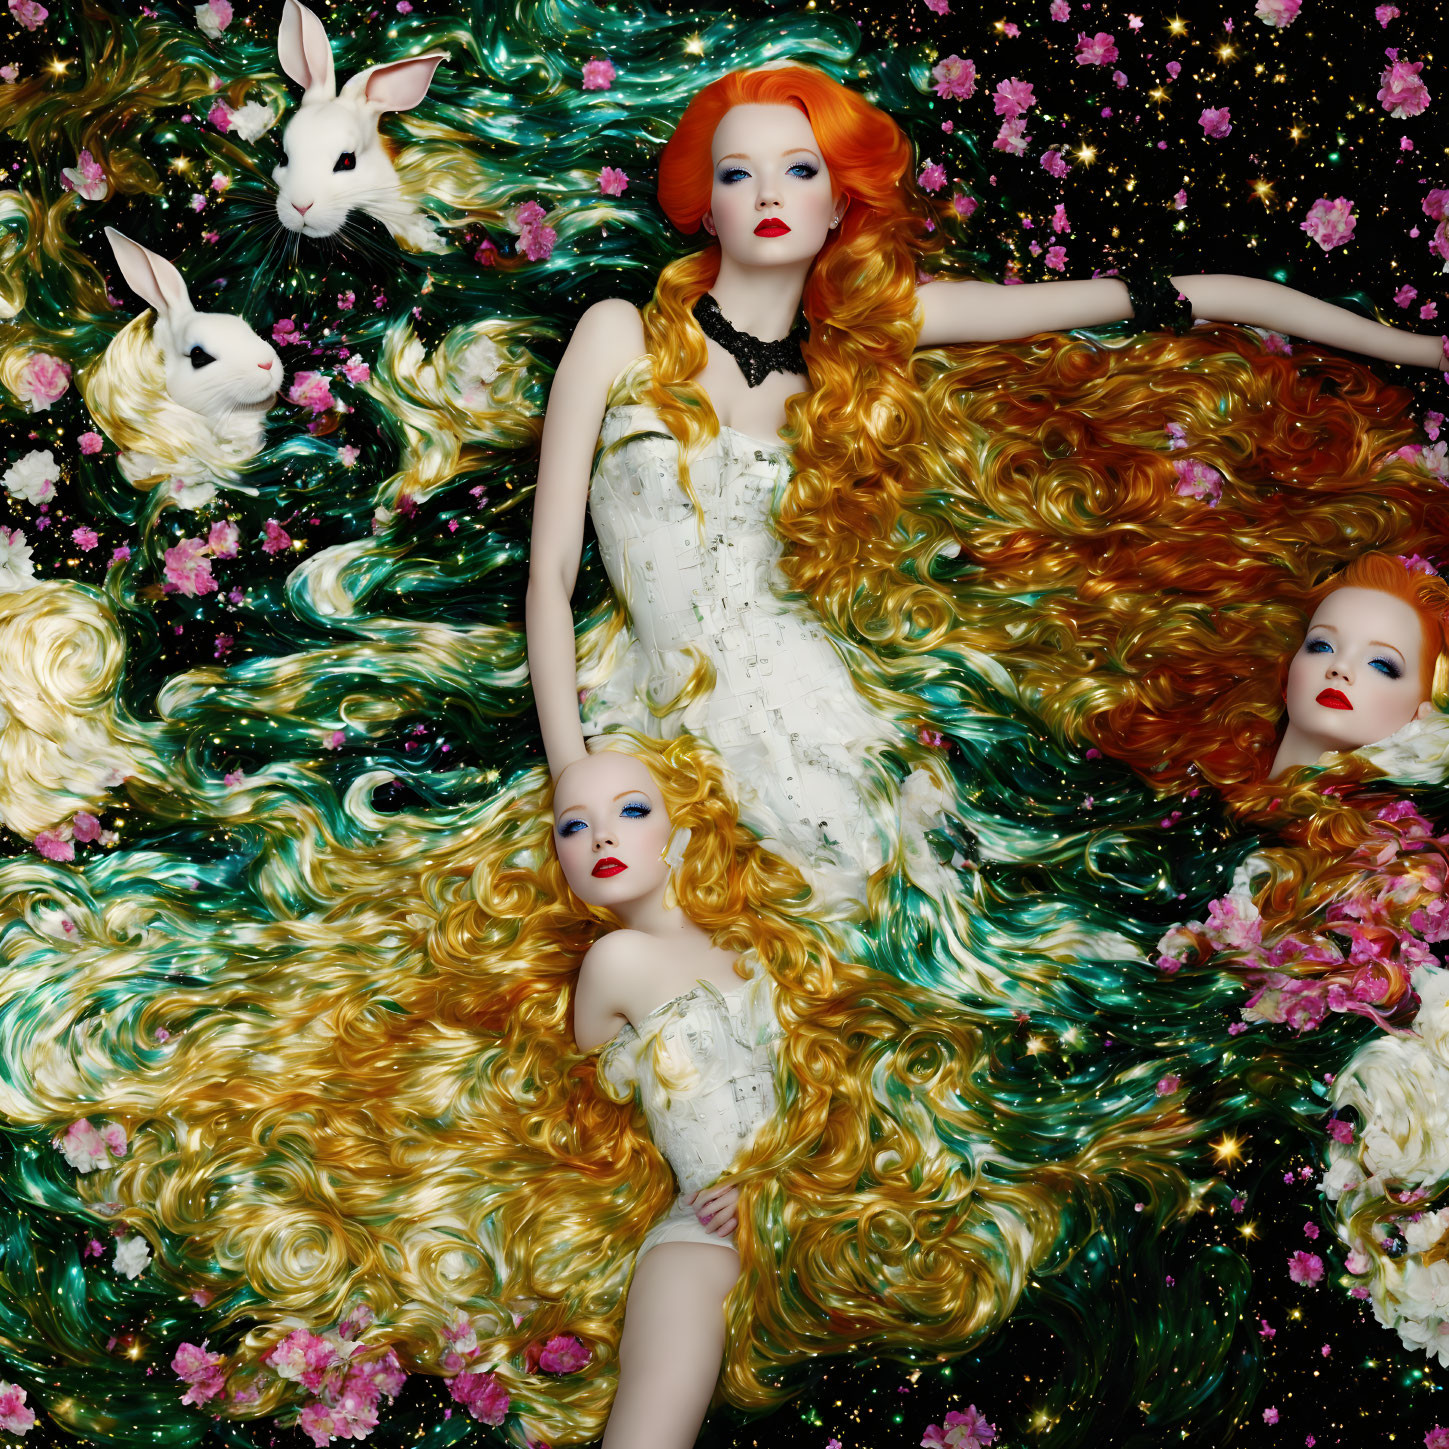 Surreal image: Woman with red hair, mannequin parts, rabbits, vibrant flowers